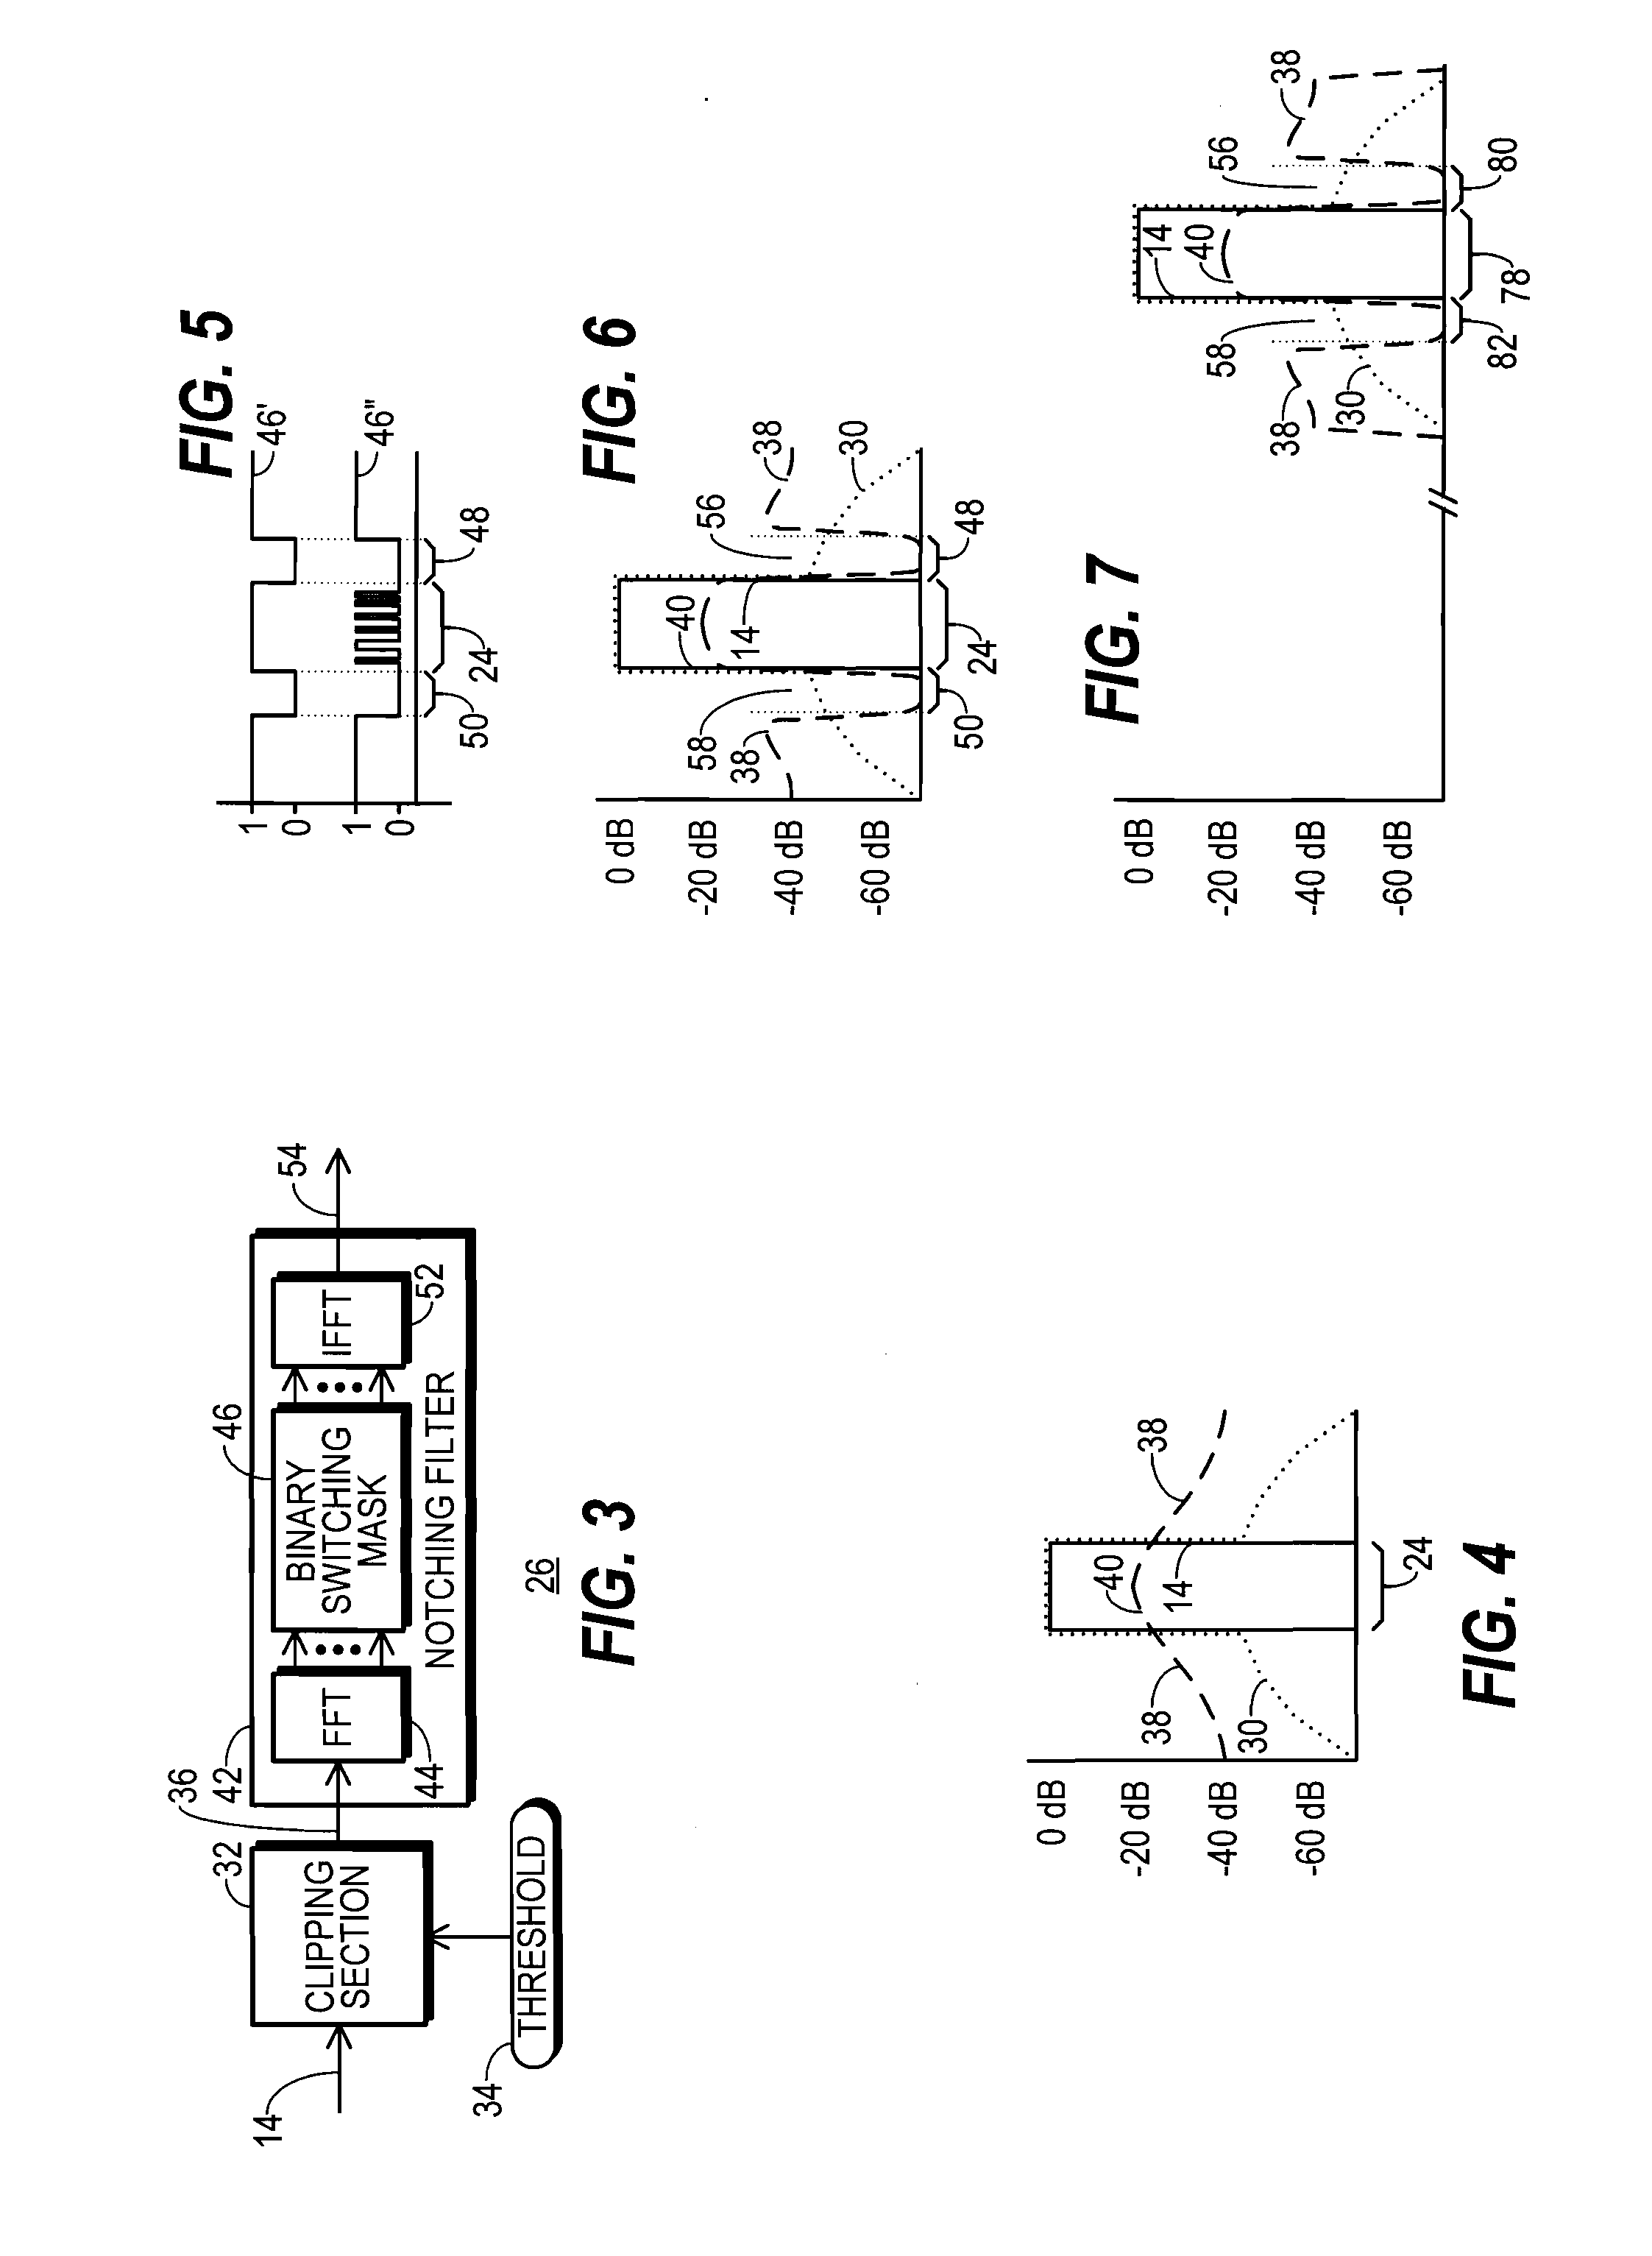 Transmitting unit that reduces papr using out-of-band distortion and method therefor